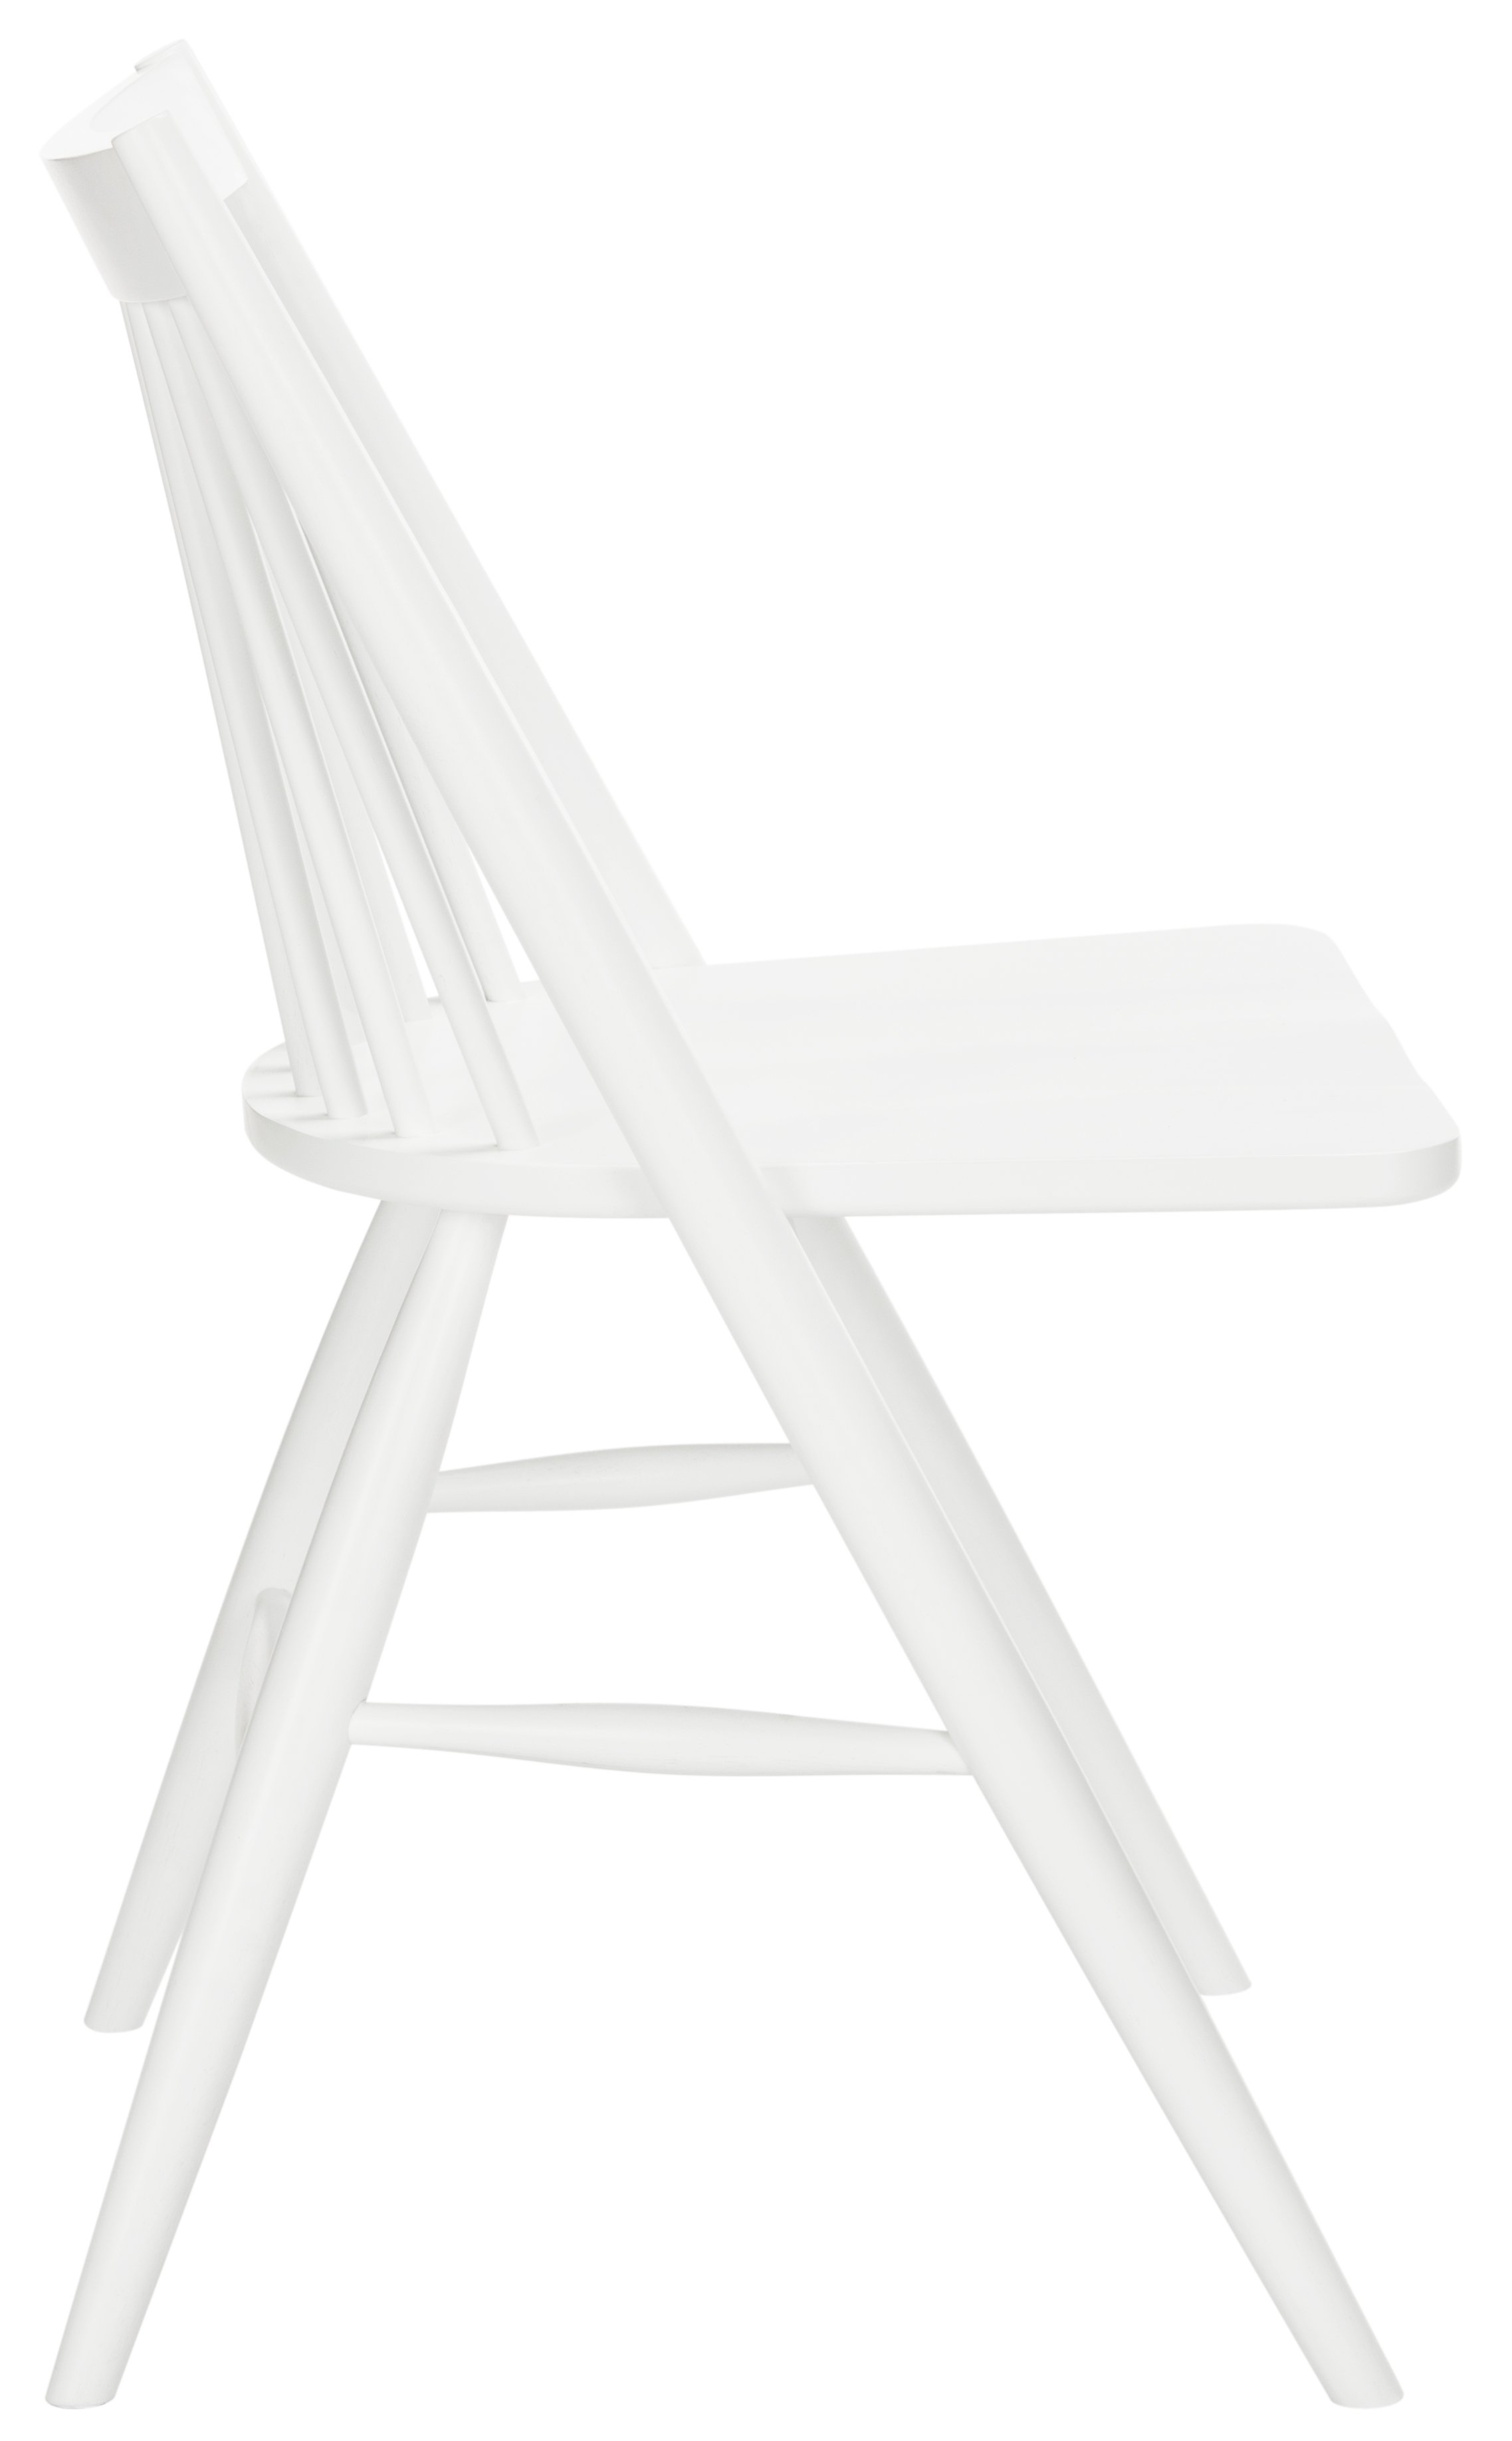 Ames Chairs, White, Set of 2 - Image 4